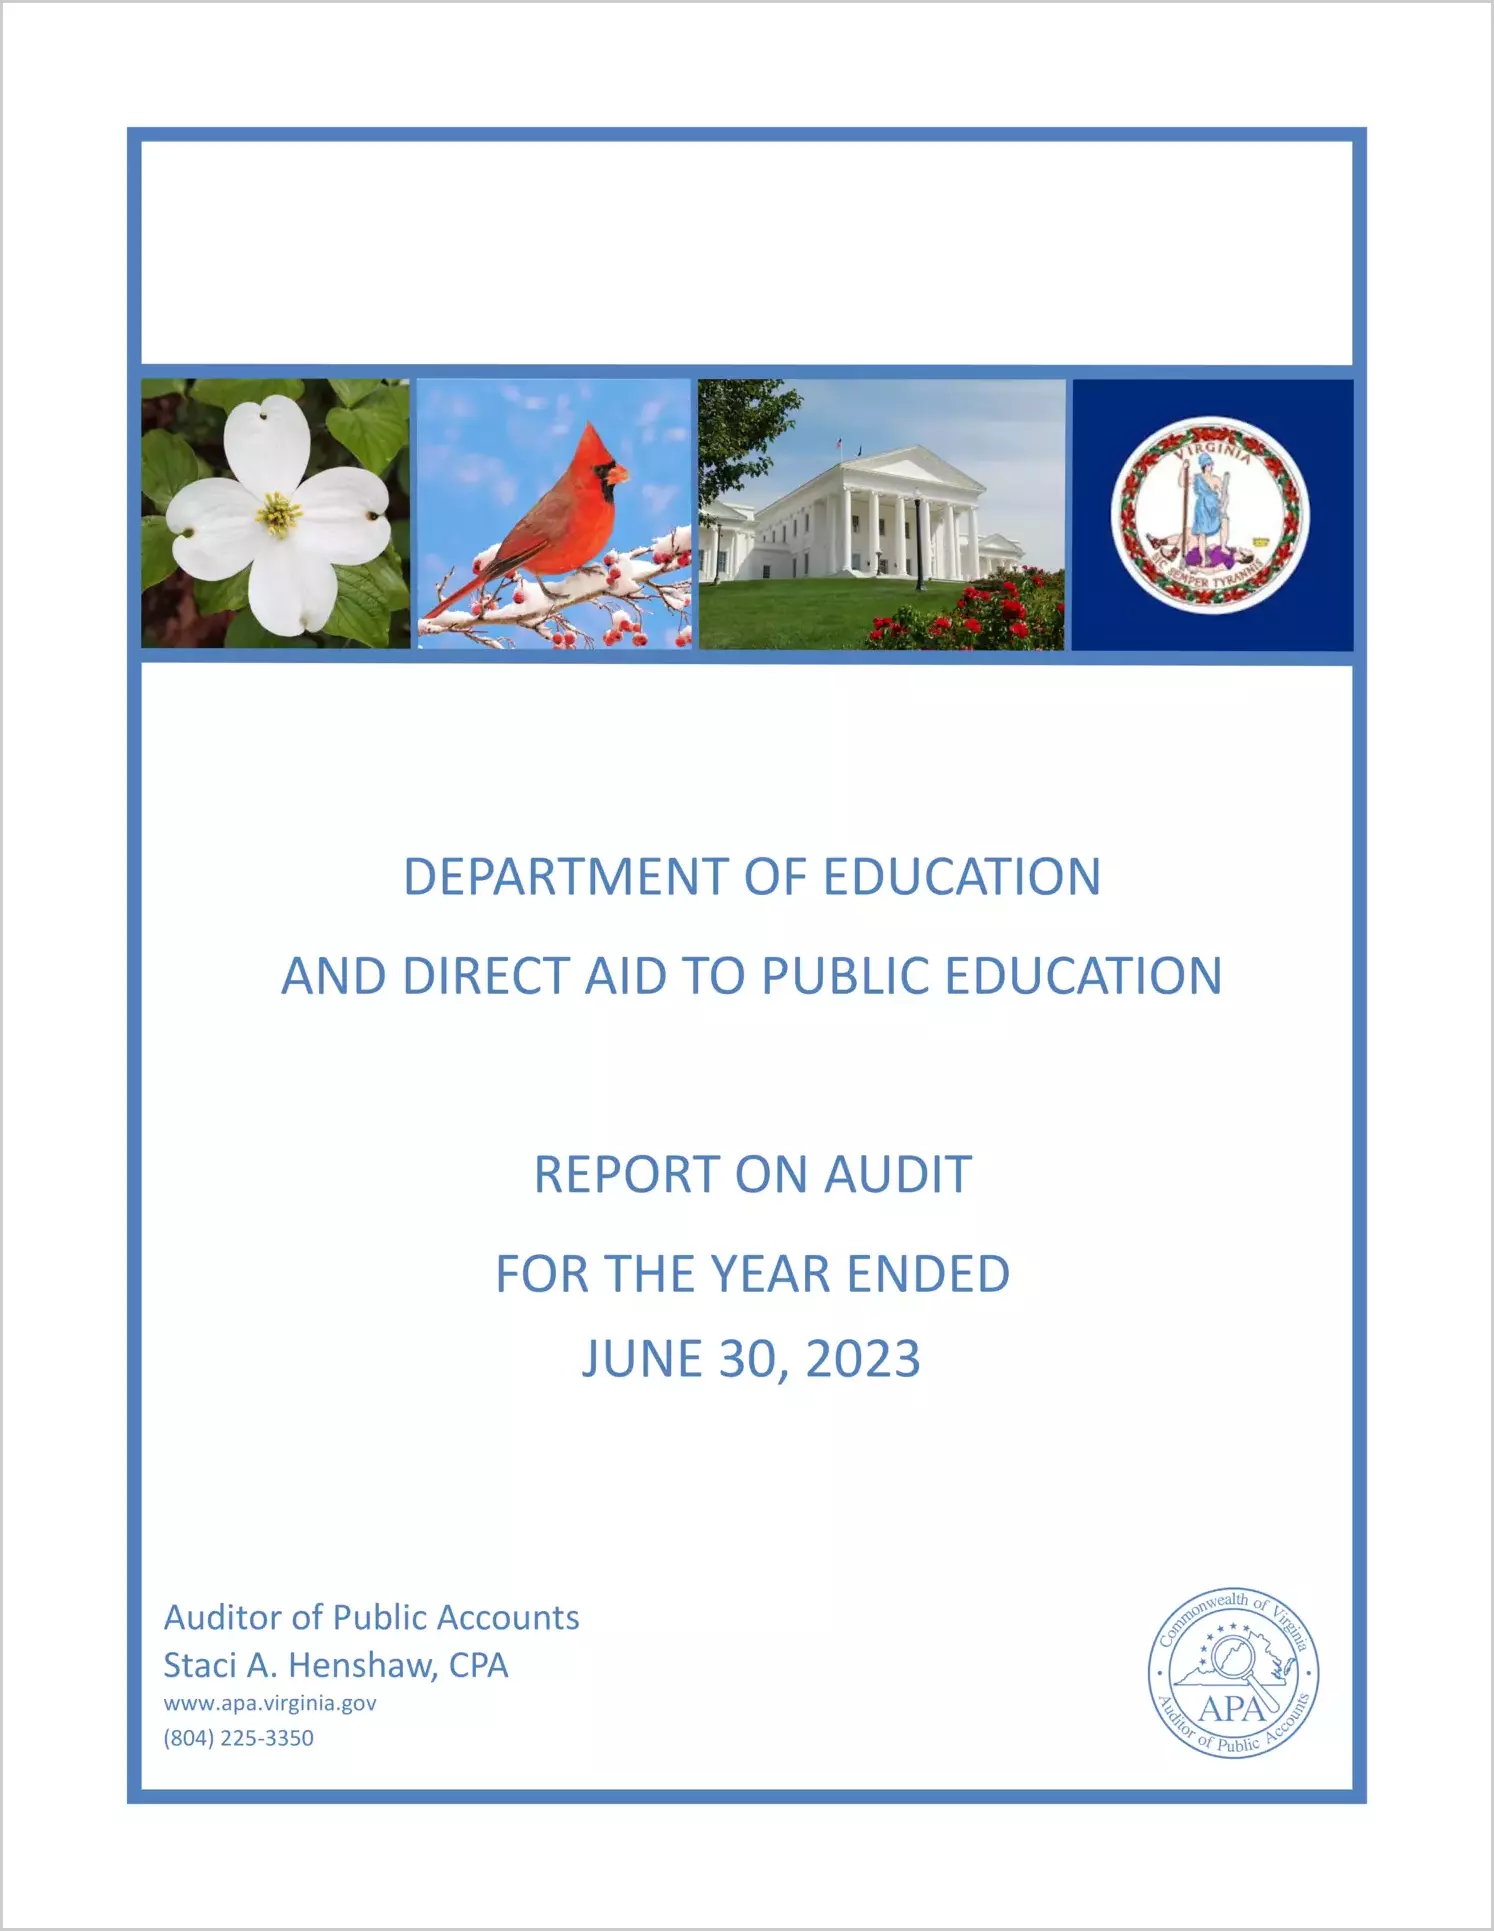 Department of Education and Direct Aid to Public Education for the year ended June 30, 2023